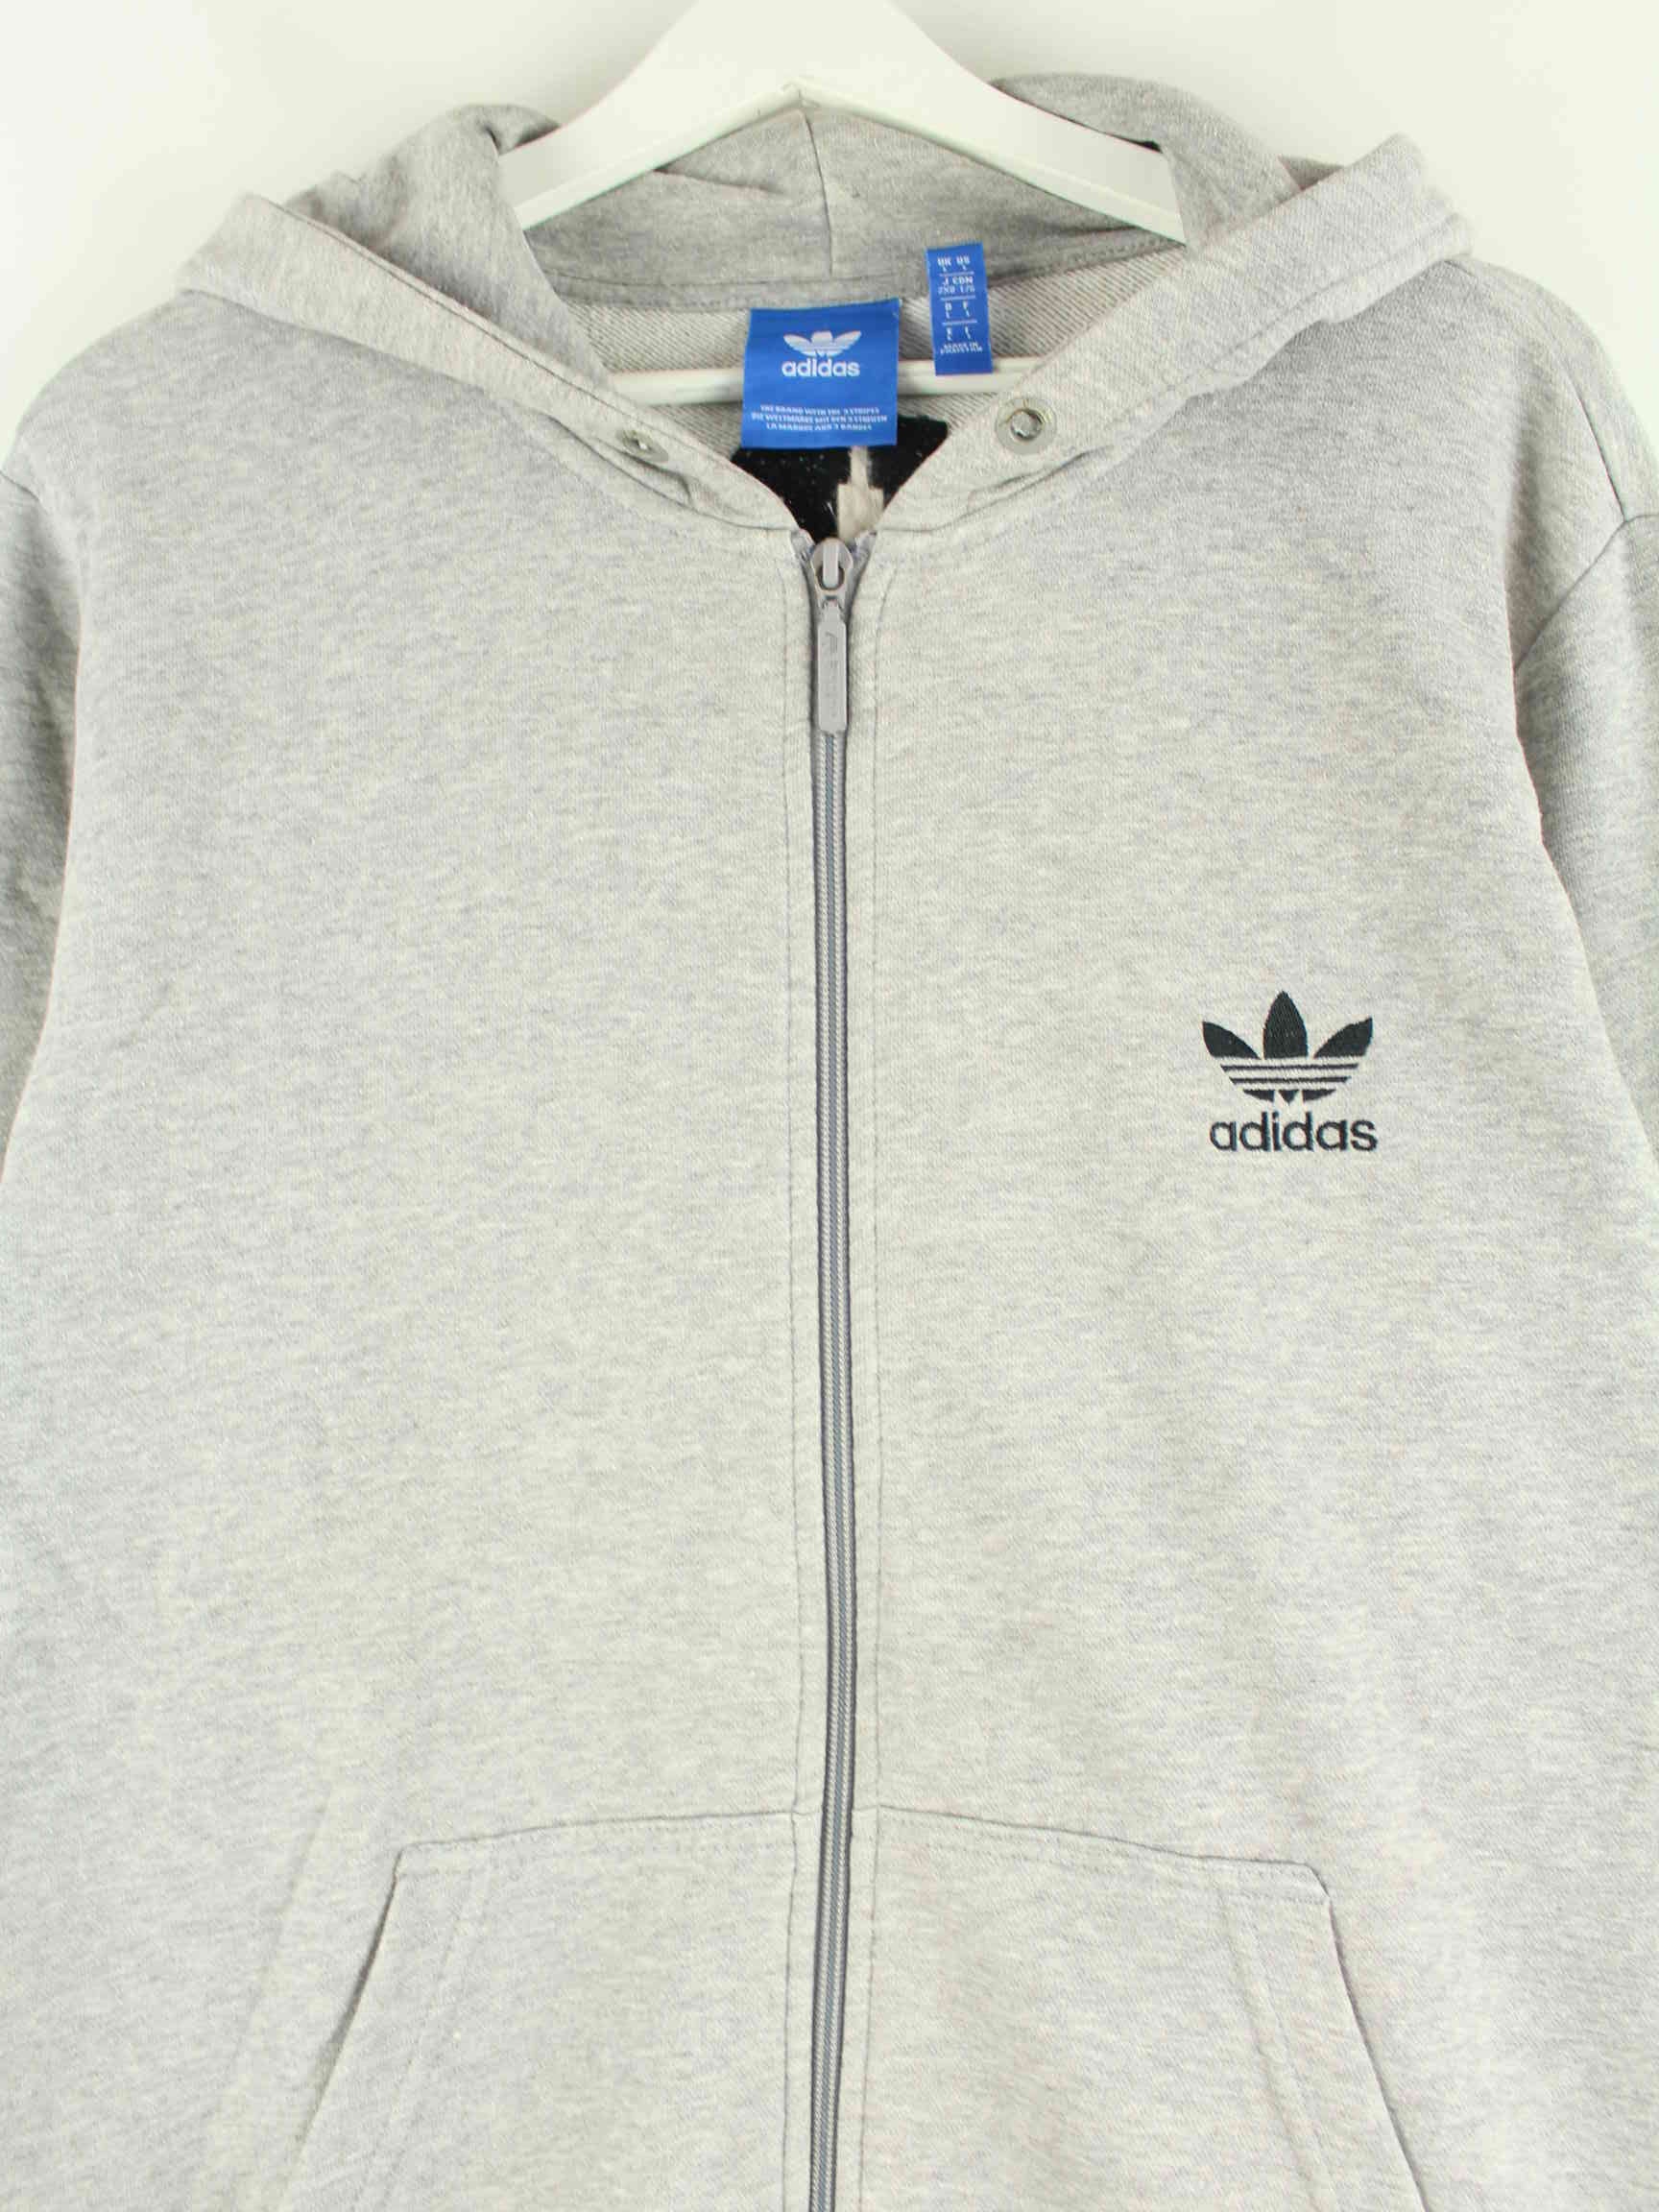 Adidas Spellout Embroidered Zip Hoodie Grau L (detail image 1)